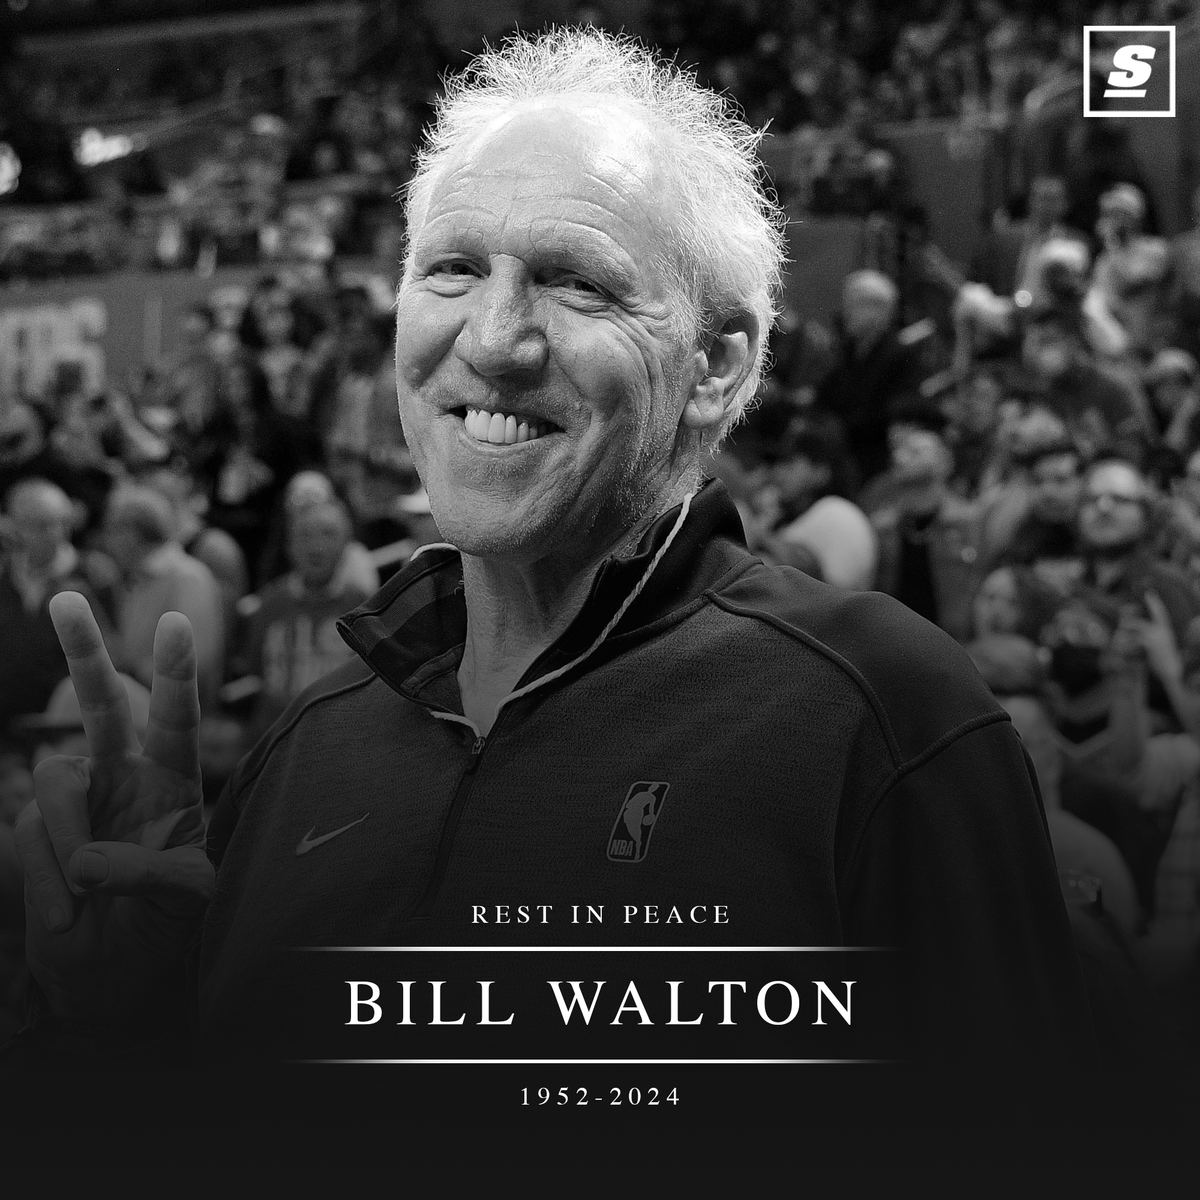 2-time NBA champion & Naismith Basketball Hall of Famer Bill Walton has passed away at the age of 71 following a battle with cancer. RIP.